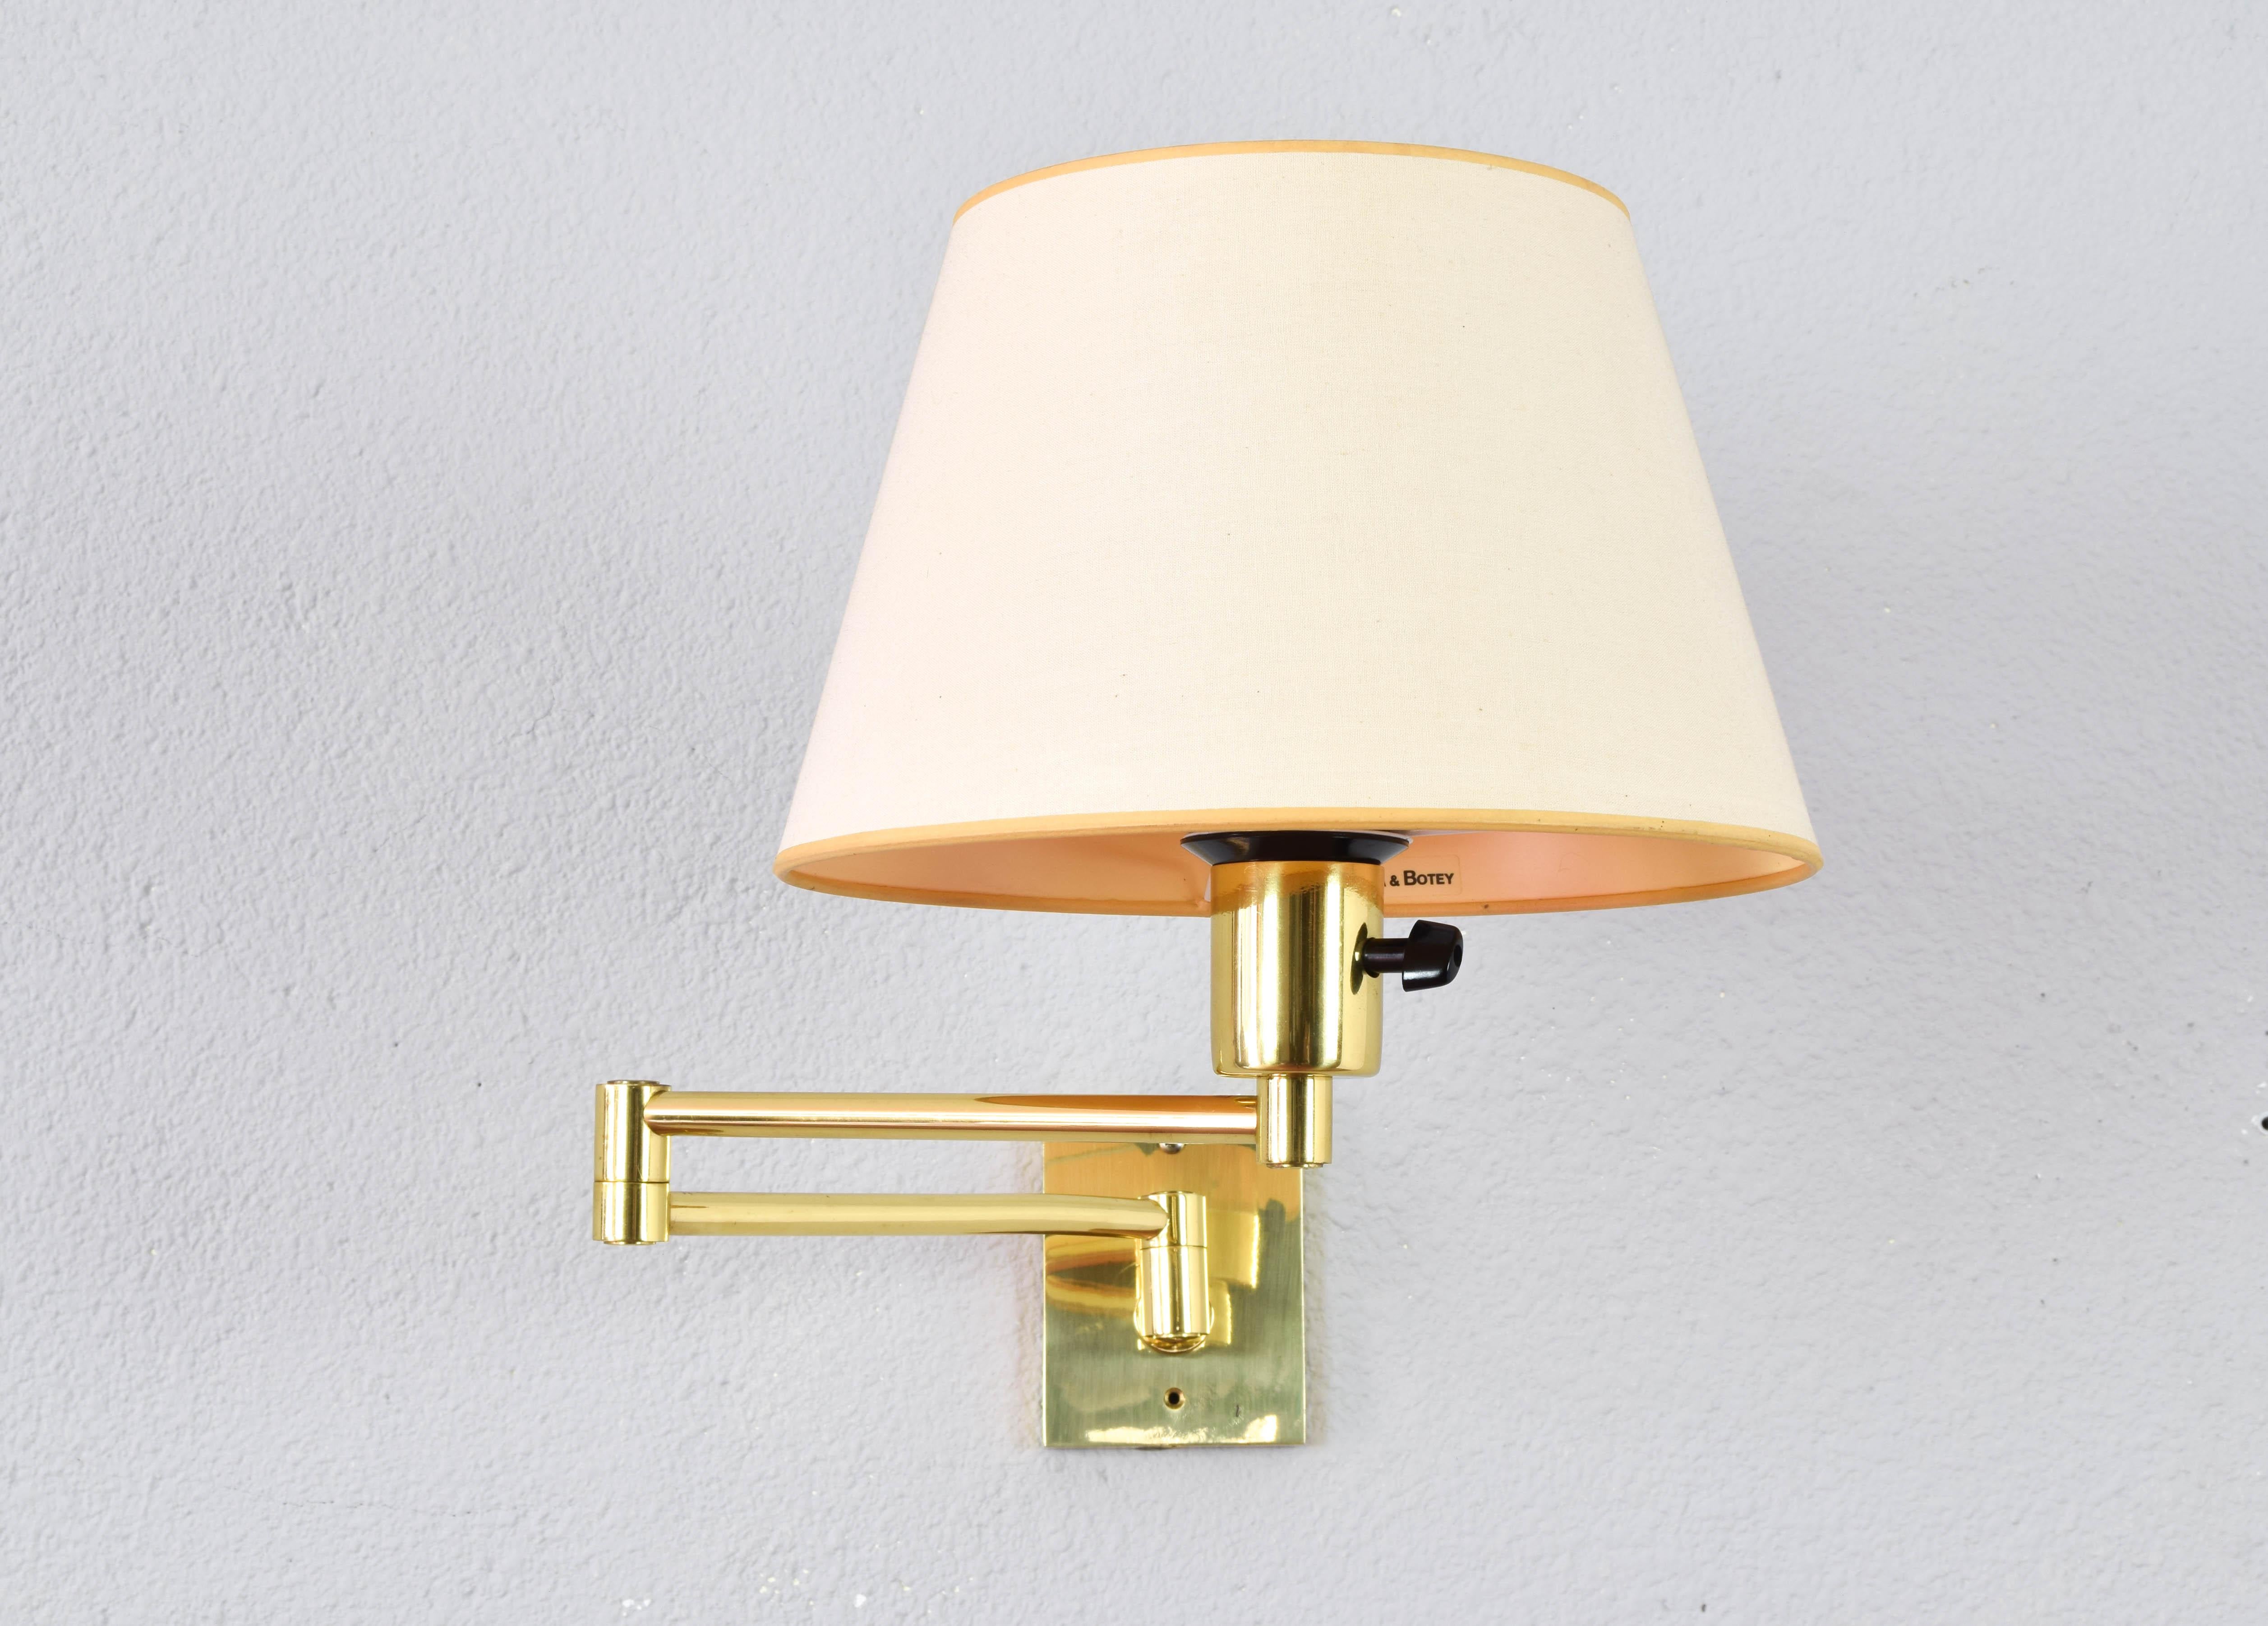 Sconce designed by George W. Hansen in the 1960s and produced by the Spanish firm Metalarte with permission from Hansen Lamps New York in the 1970s. Brass structure and articulated arm.
Measurements:
Depth 54 cm
Length of each arm 28 cm
Height